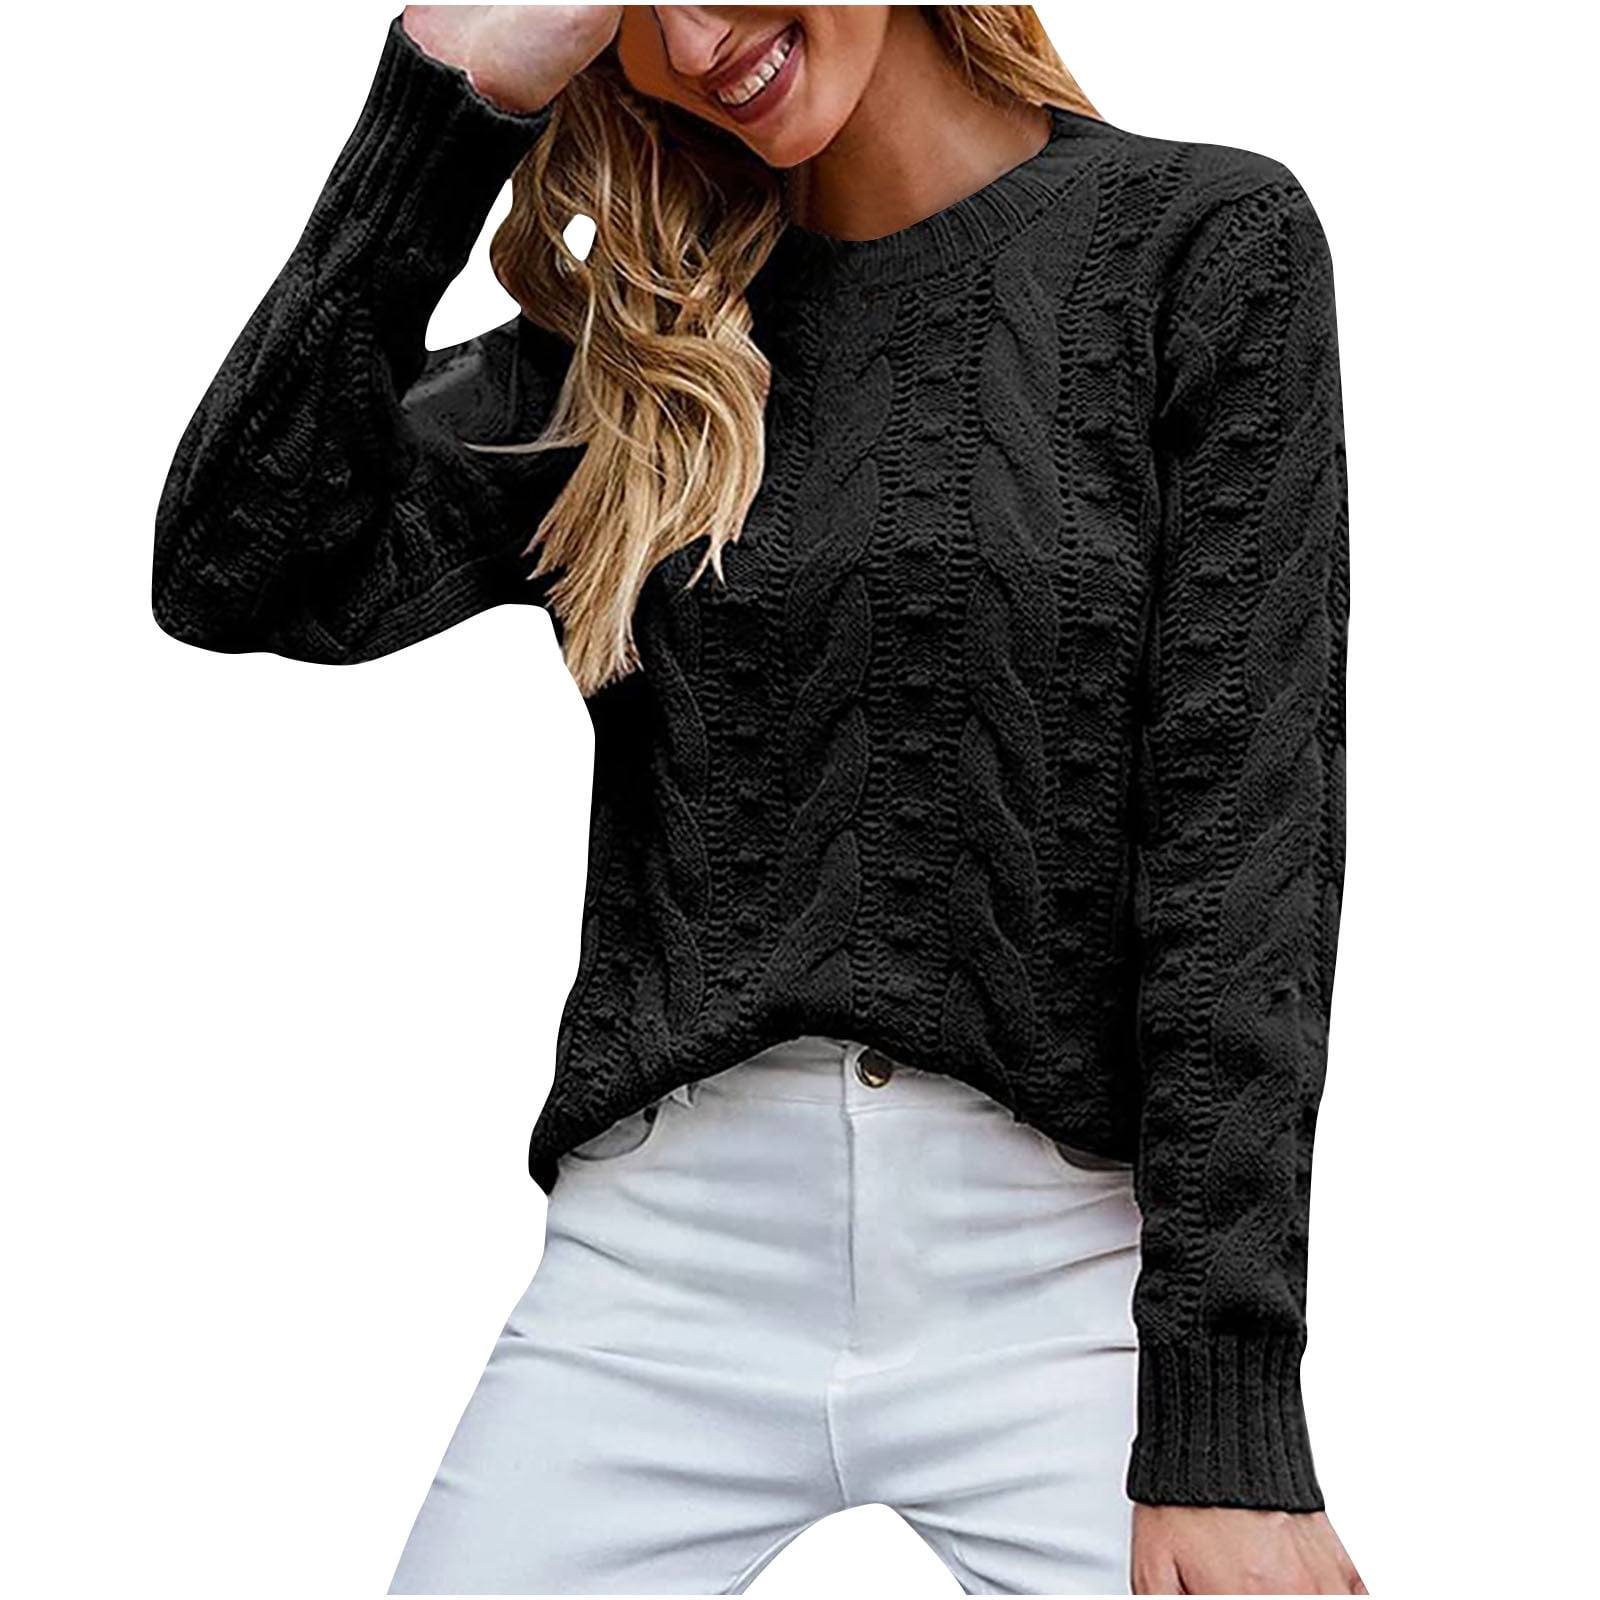 YOTAMI Tops for Women Casual Fall - Solid Color Crew Neck on Prime Today  Deals Clearance Long Sleeve Winter Black Tops 